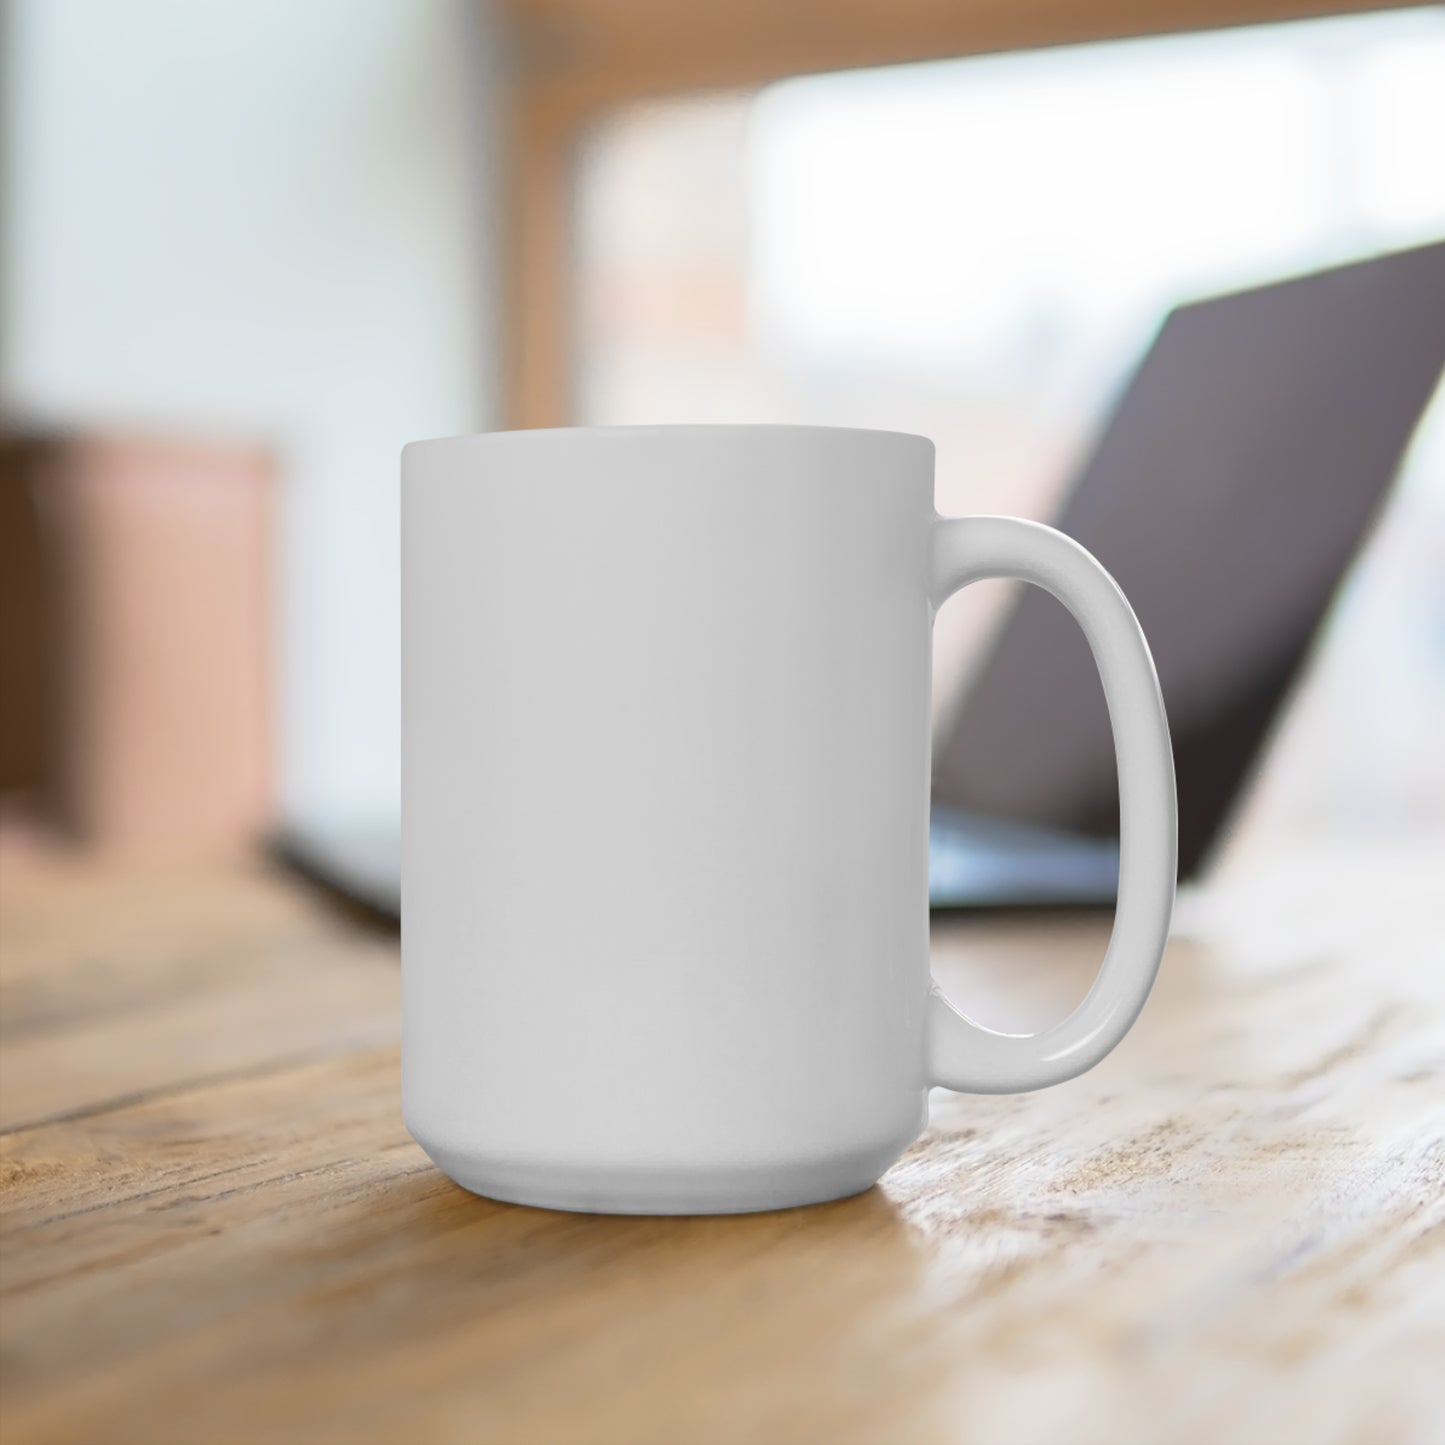 Bold and Uncompromising Statement Mug 15oz: Living Wage Now!